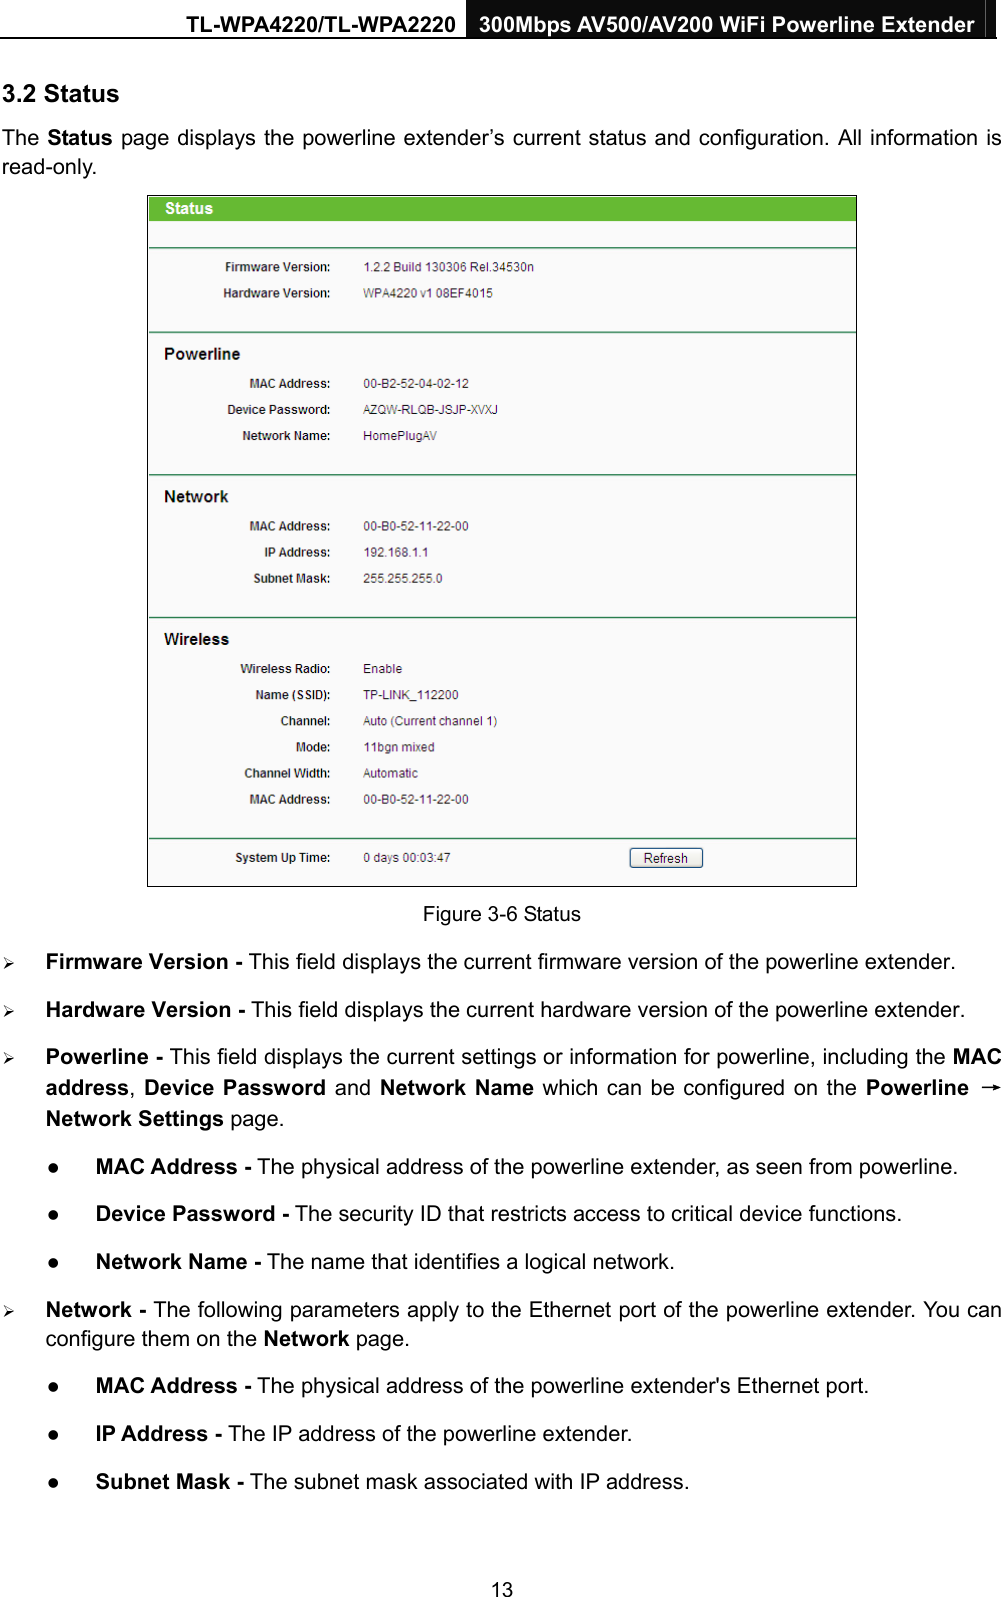 TL-WPA4220/TL-WPA2220 300Mbps AV500/AV200 WiFi Powerline Extender  13 3.2 Status The Status  page displays the powerline extender’s current status and configuration. All information is read-only.  Figure 3-6 Status ¾ Firmware Version - This field displays the current firmware version of the powerline extender. ¾ Hardware Version - This field displays the current hardware version of the powerline extender. ¾ Powerline - This field displays the current settings or information for powerline, including the MAC address, Device Password and Network Name which can be configured on the Powerline →Network Settings page.   z MAC Address - The physical address of the powerline extender, as seen from powerline. z Device Password - The security ID that restricts access to critical device functions. z Network Name - The name that identifies a logical network. ¾ Network - The following parameters apply to the Ethernet port of the powerline extender. You can configure them on the Network page.   z MAC Address - The physical address of the powerline extender&apos;s Ethernet port. z IP Address - The IP address of the powerline extender.   z Subnet Mask - The subnet mask associated with IP address.   